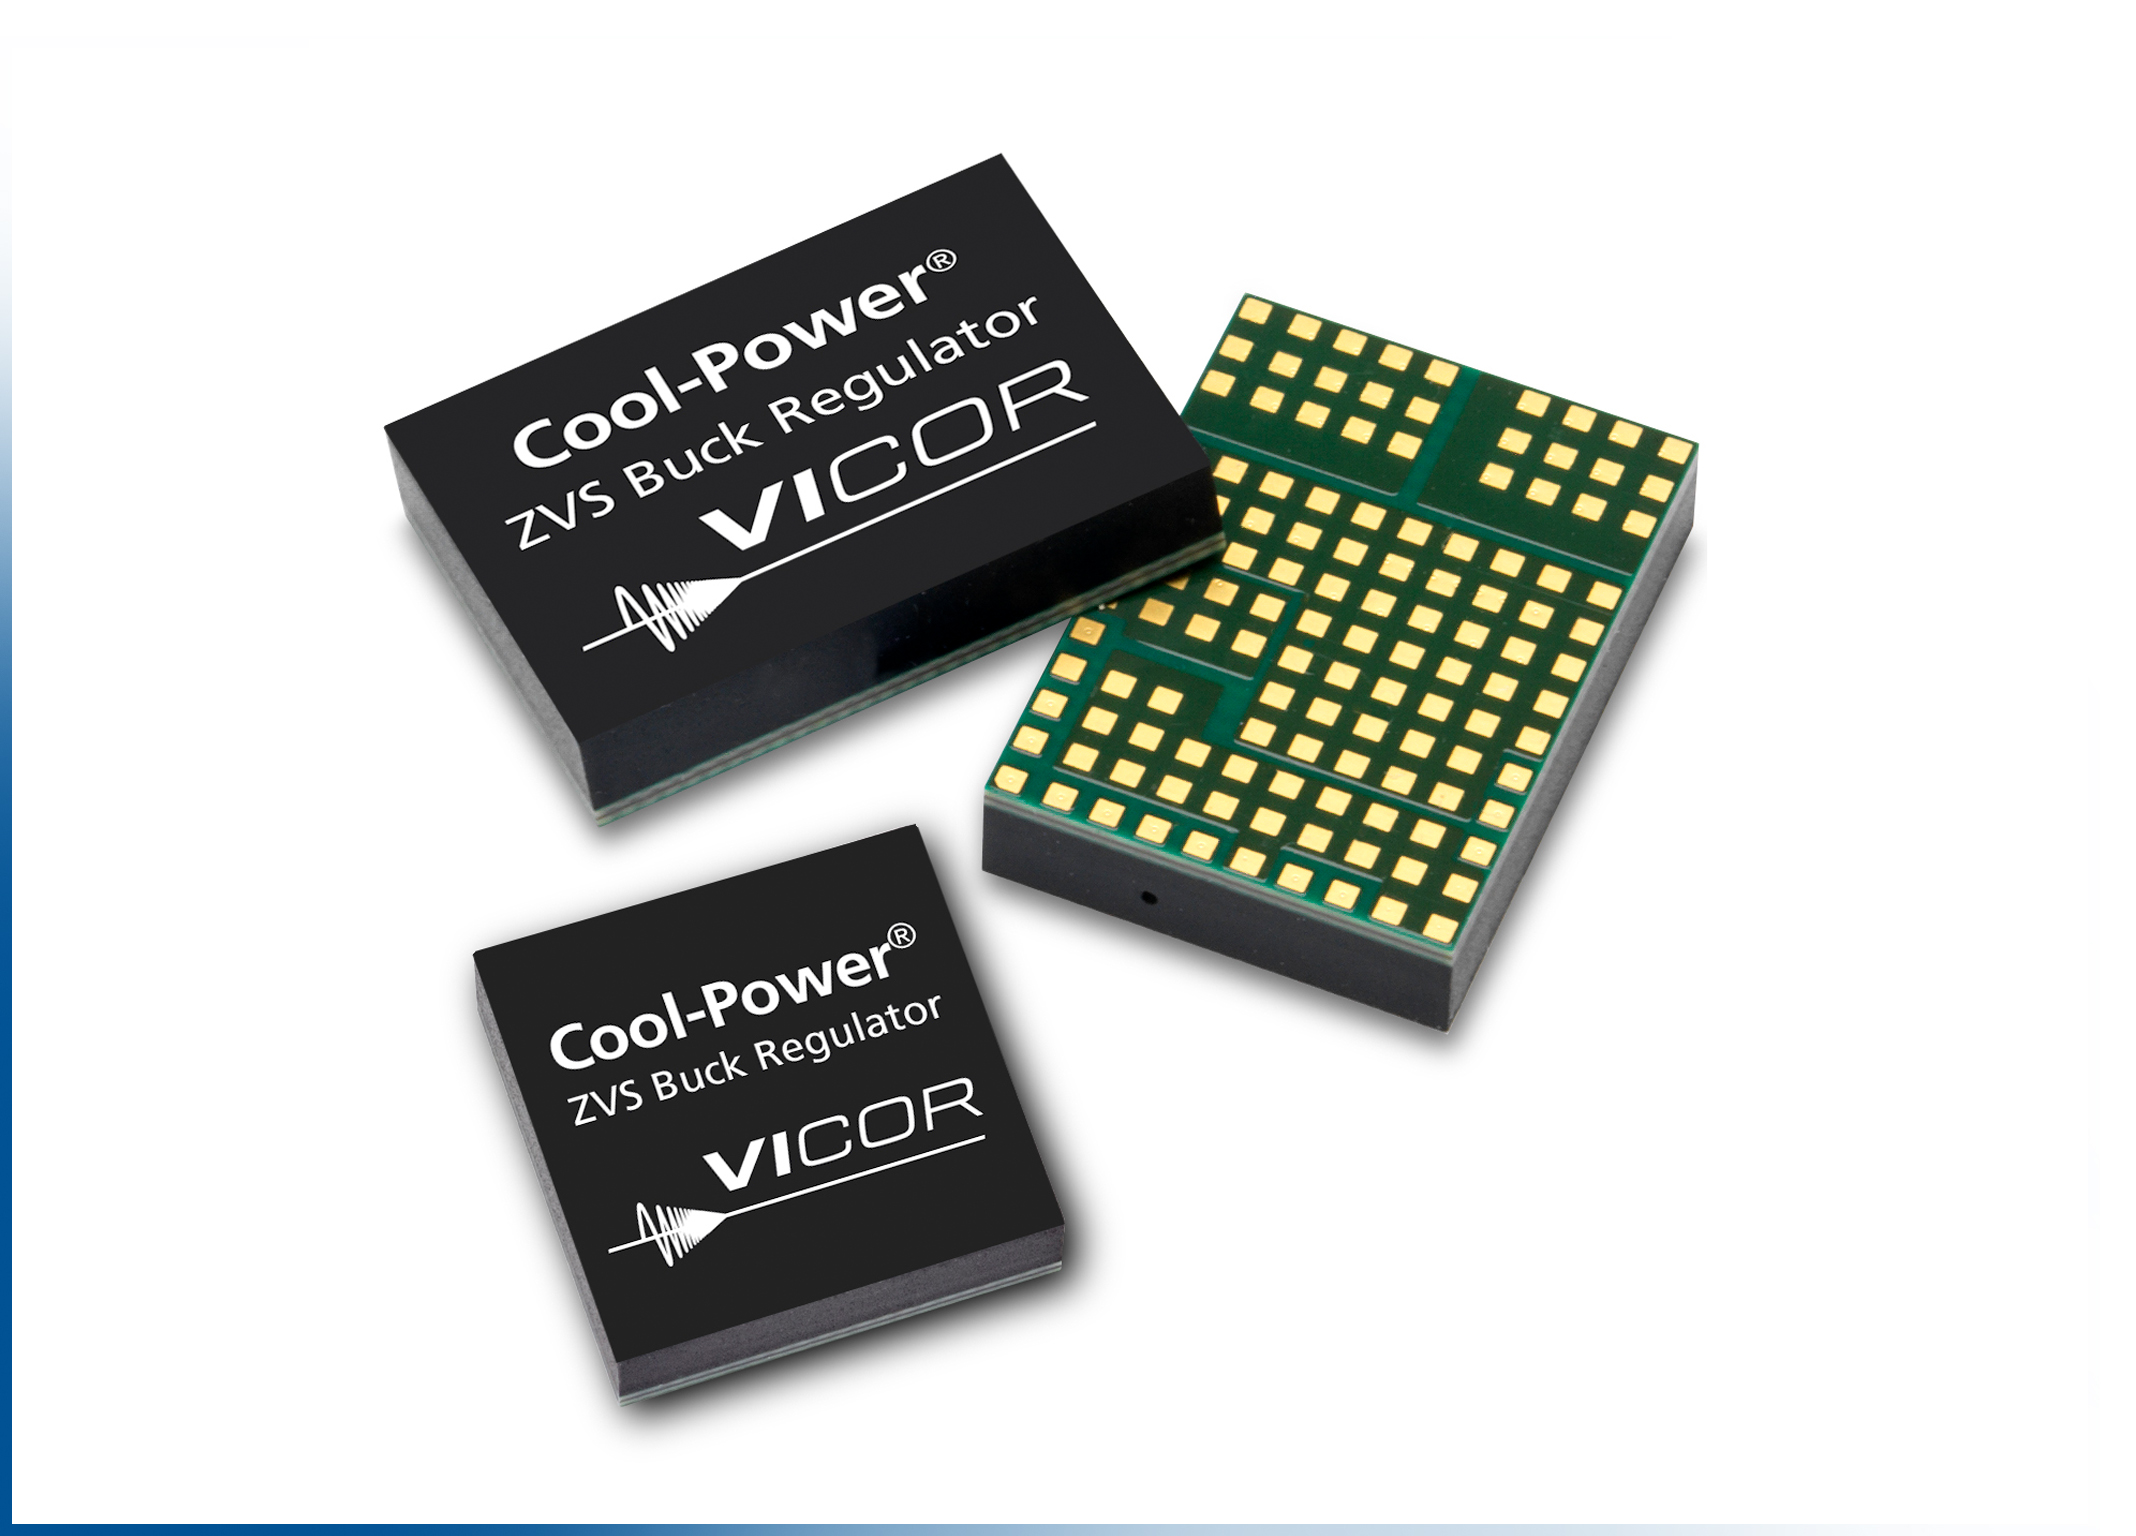 Cool-Power ZVS Buck Regulator Extends 48V Direct-to-Point of Load Product Family